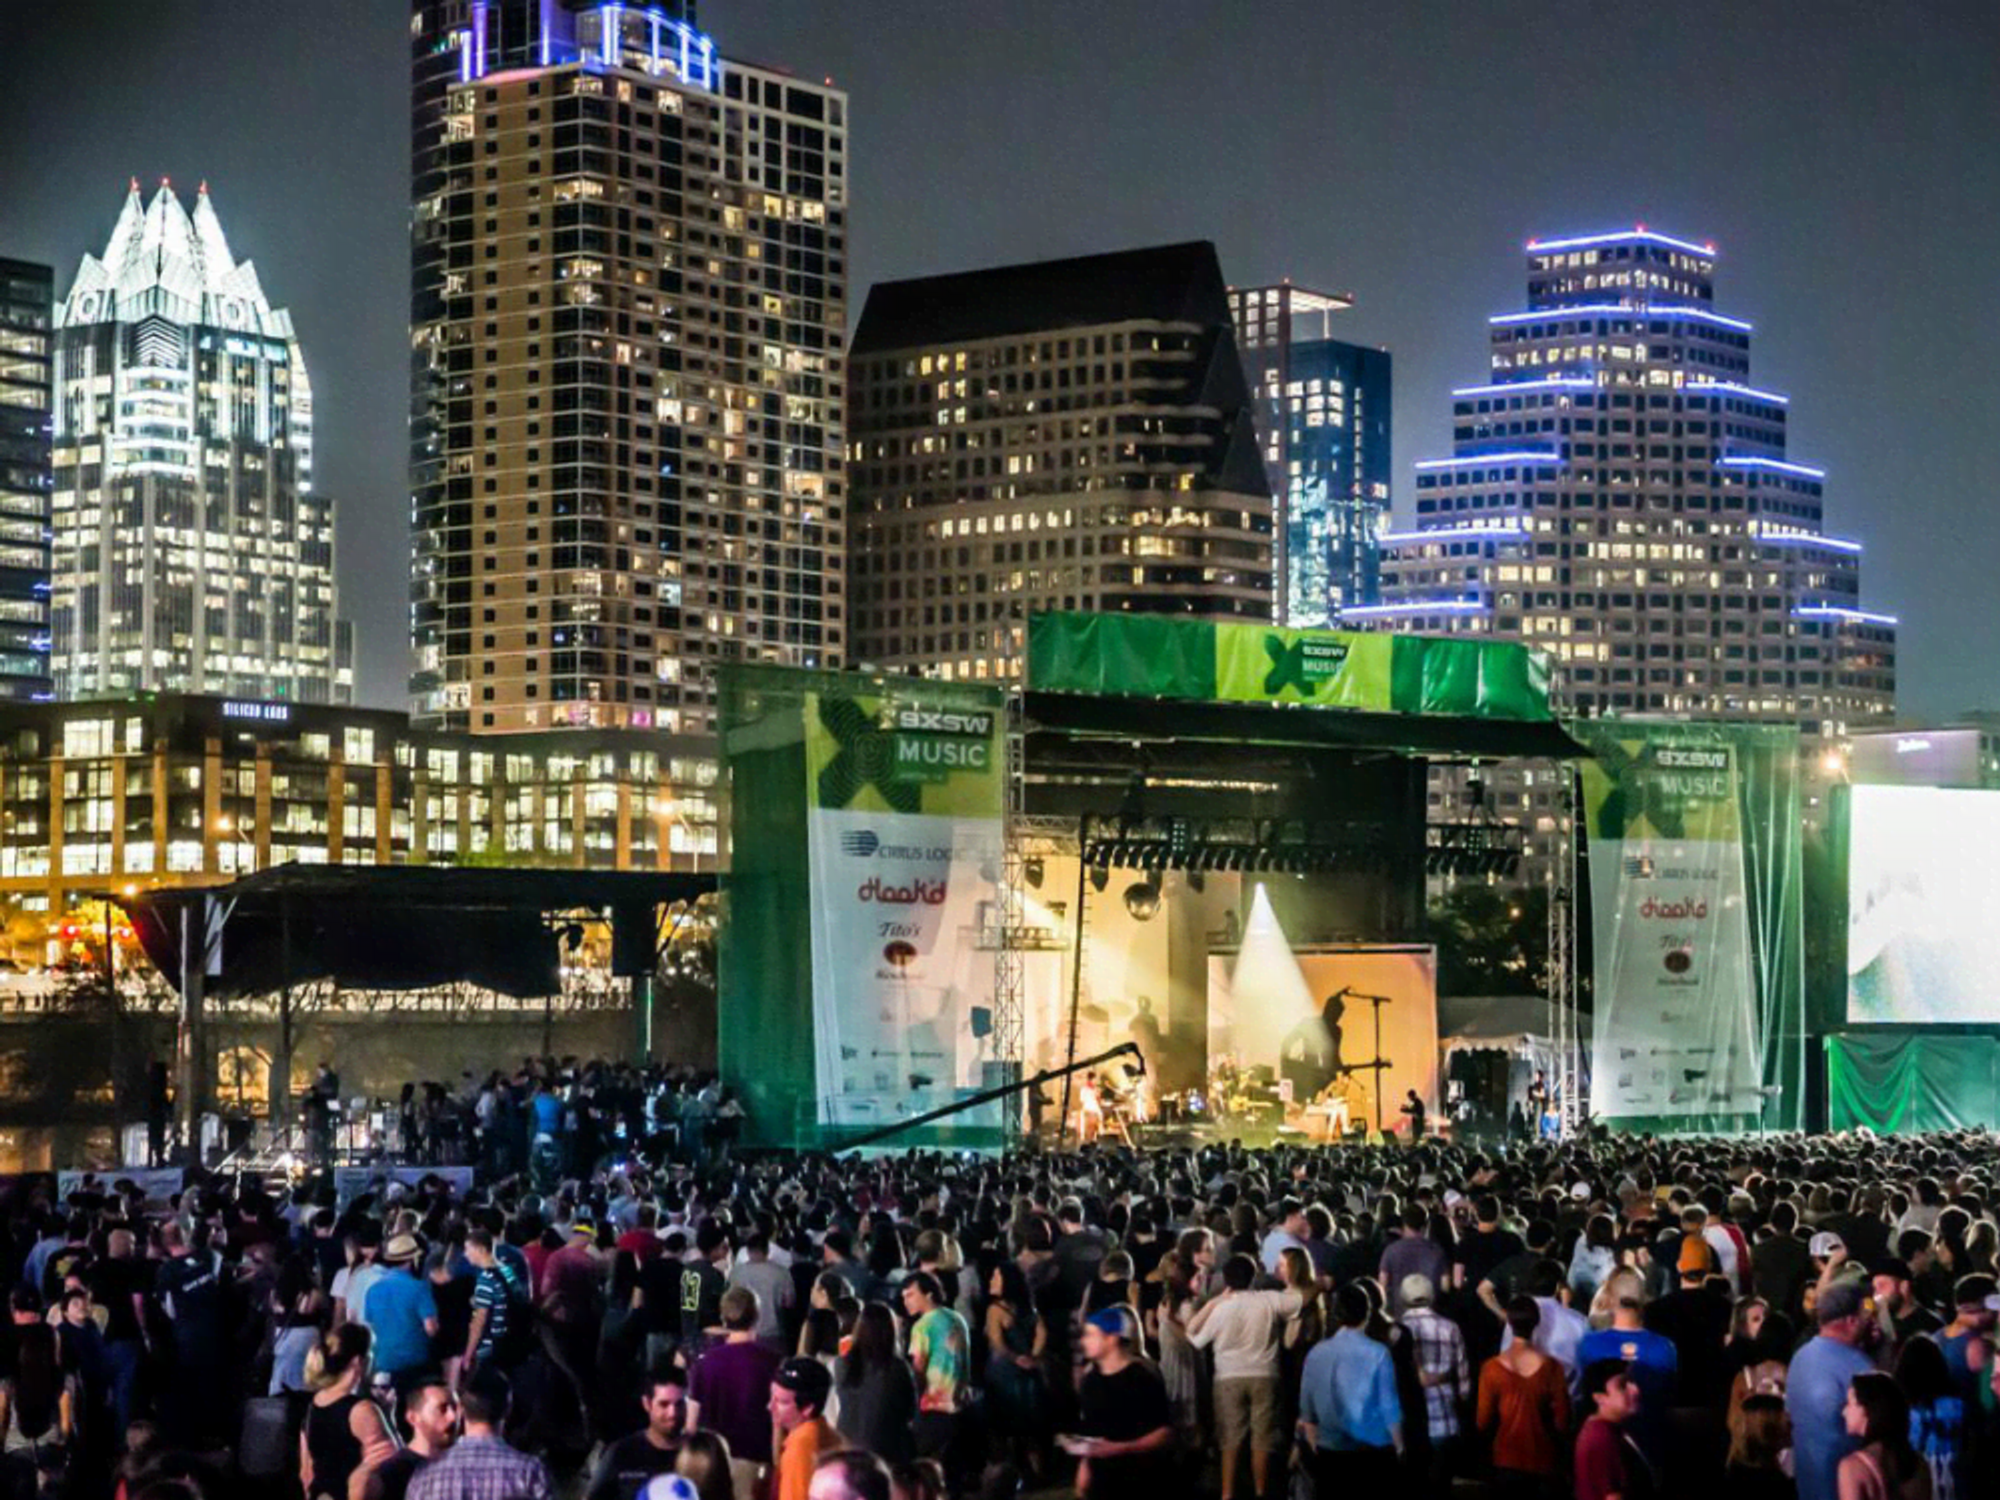 Want the lowdown on the best free official SXSW happenings? We've got the details.